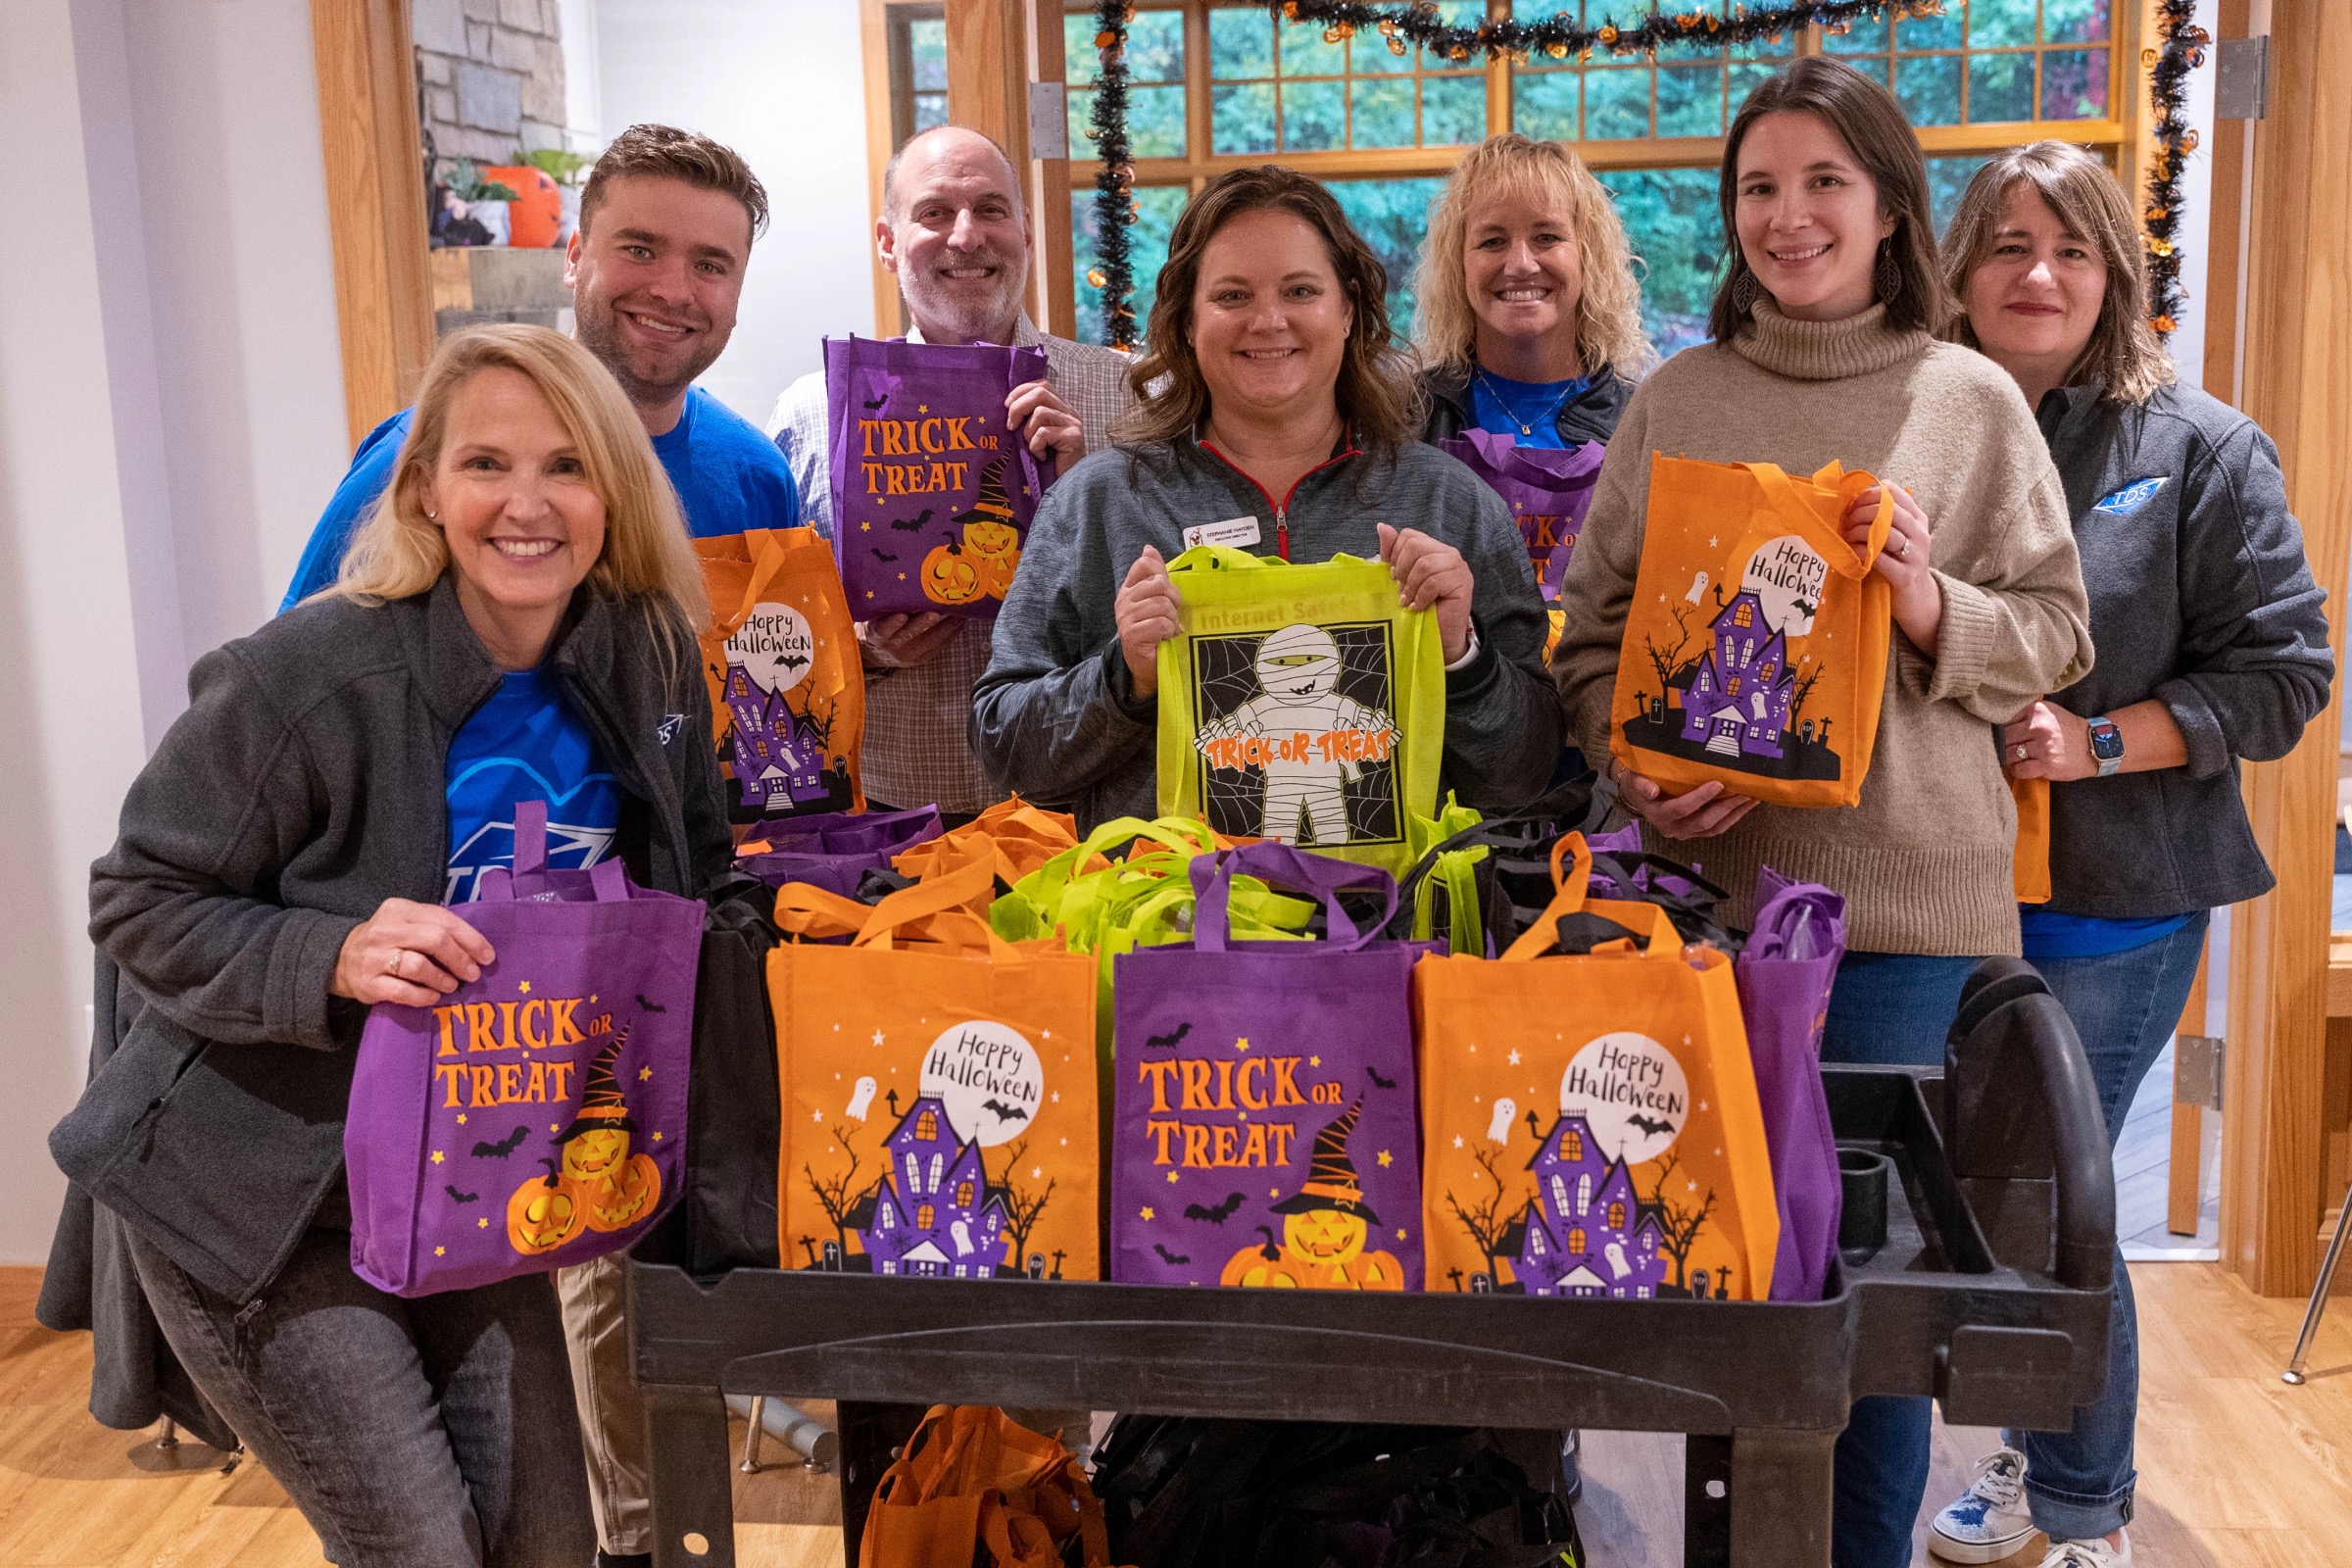 Group of people holding trick or treat bags